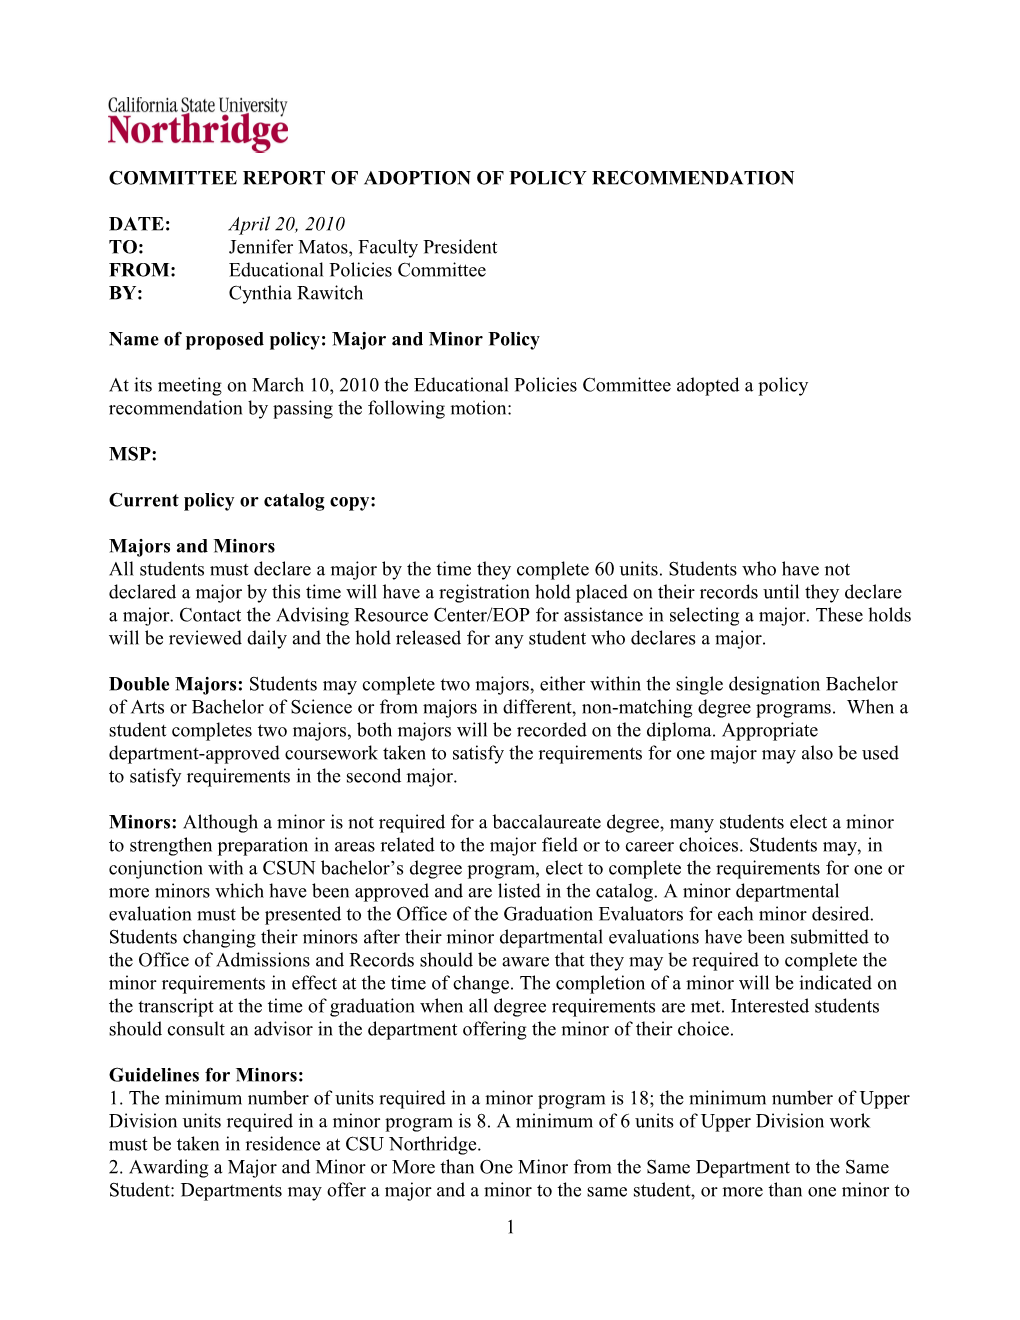 Committee Report of Adoption of Policy Recommendation